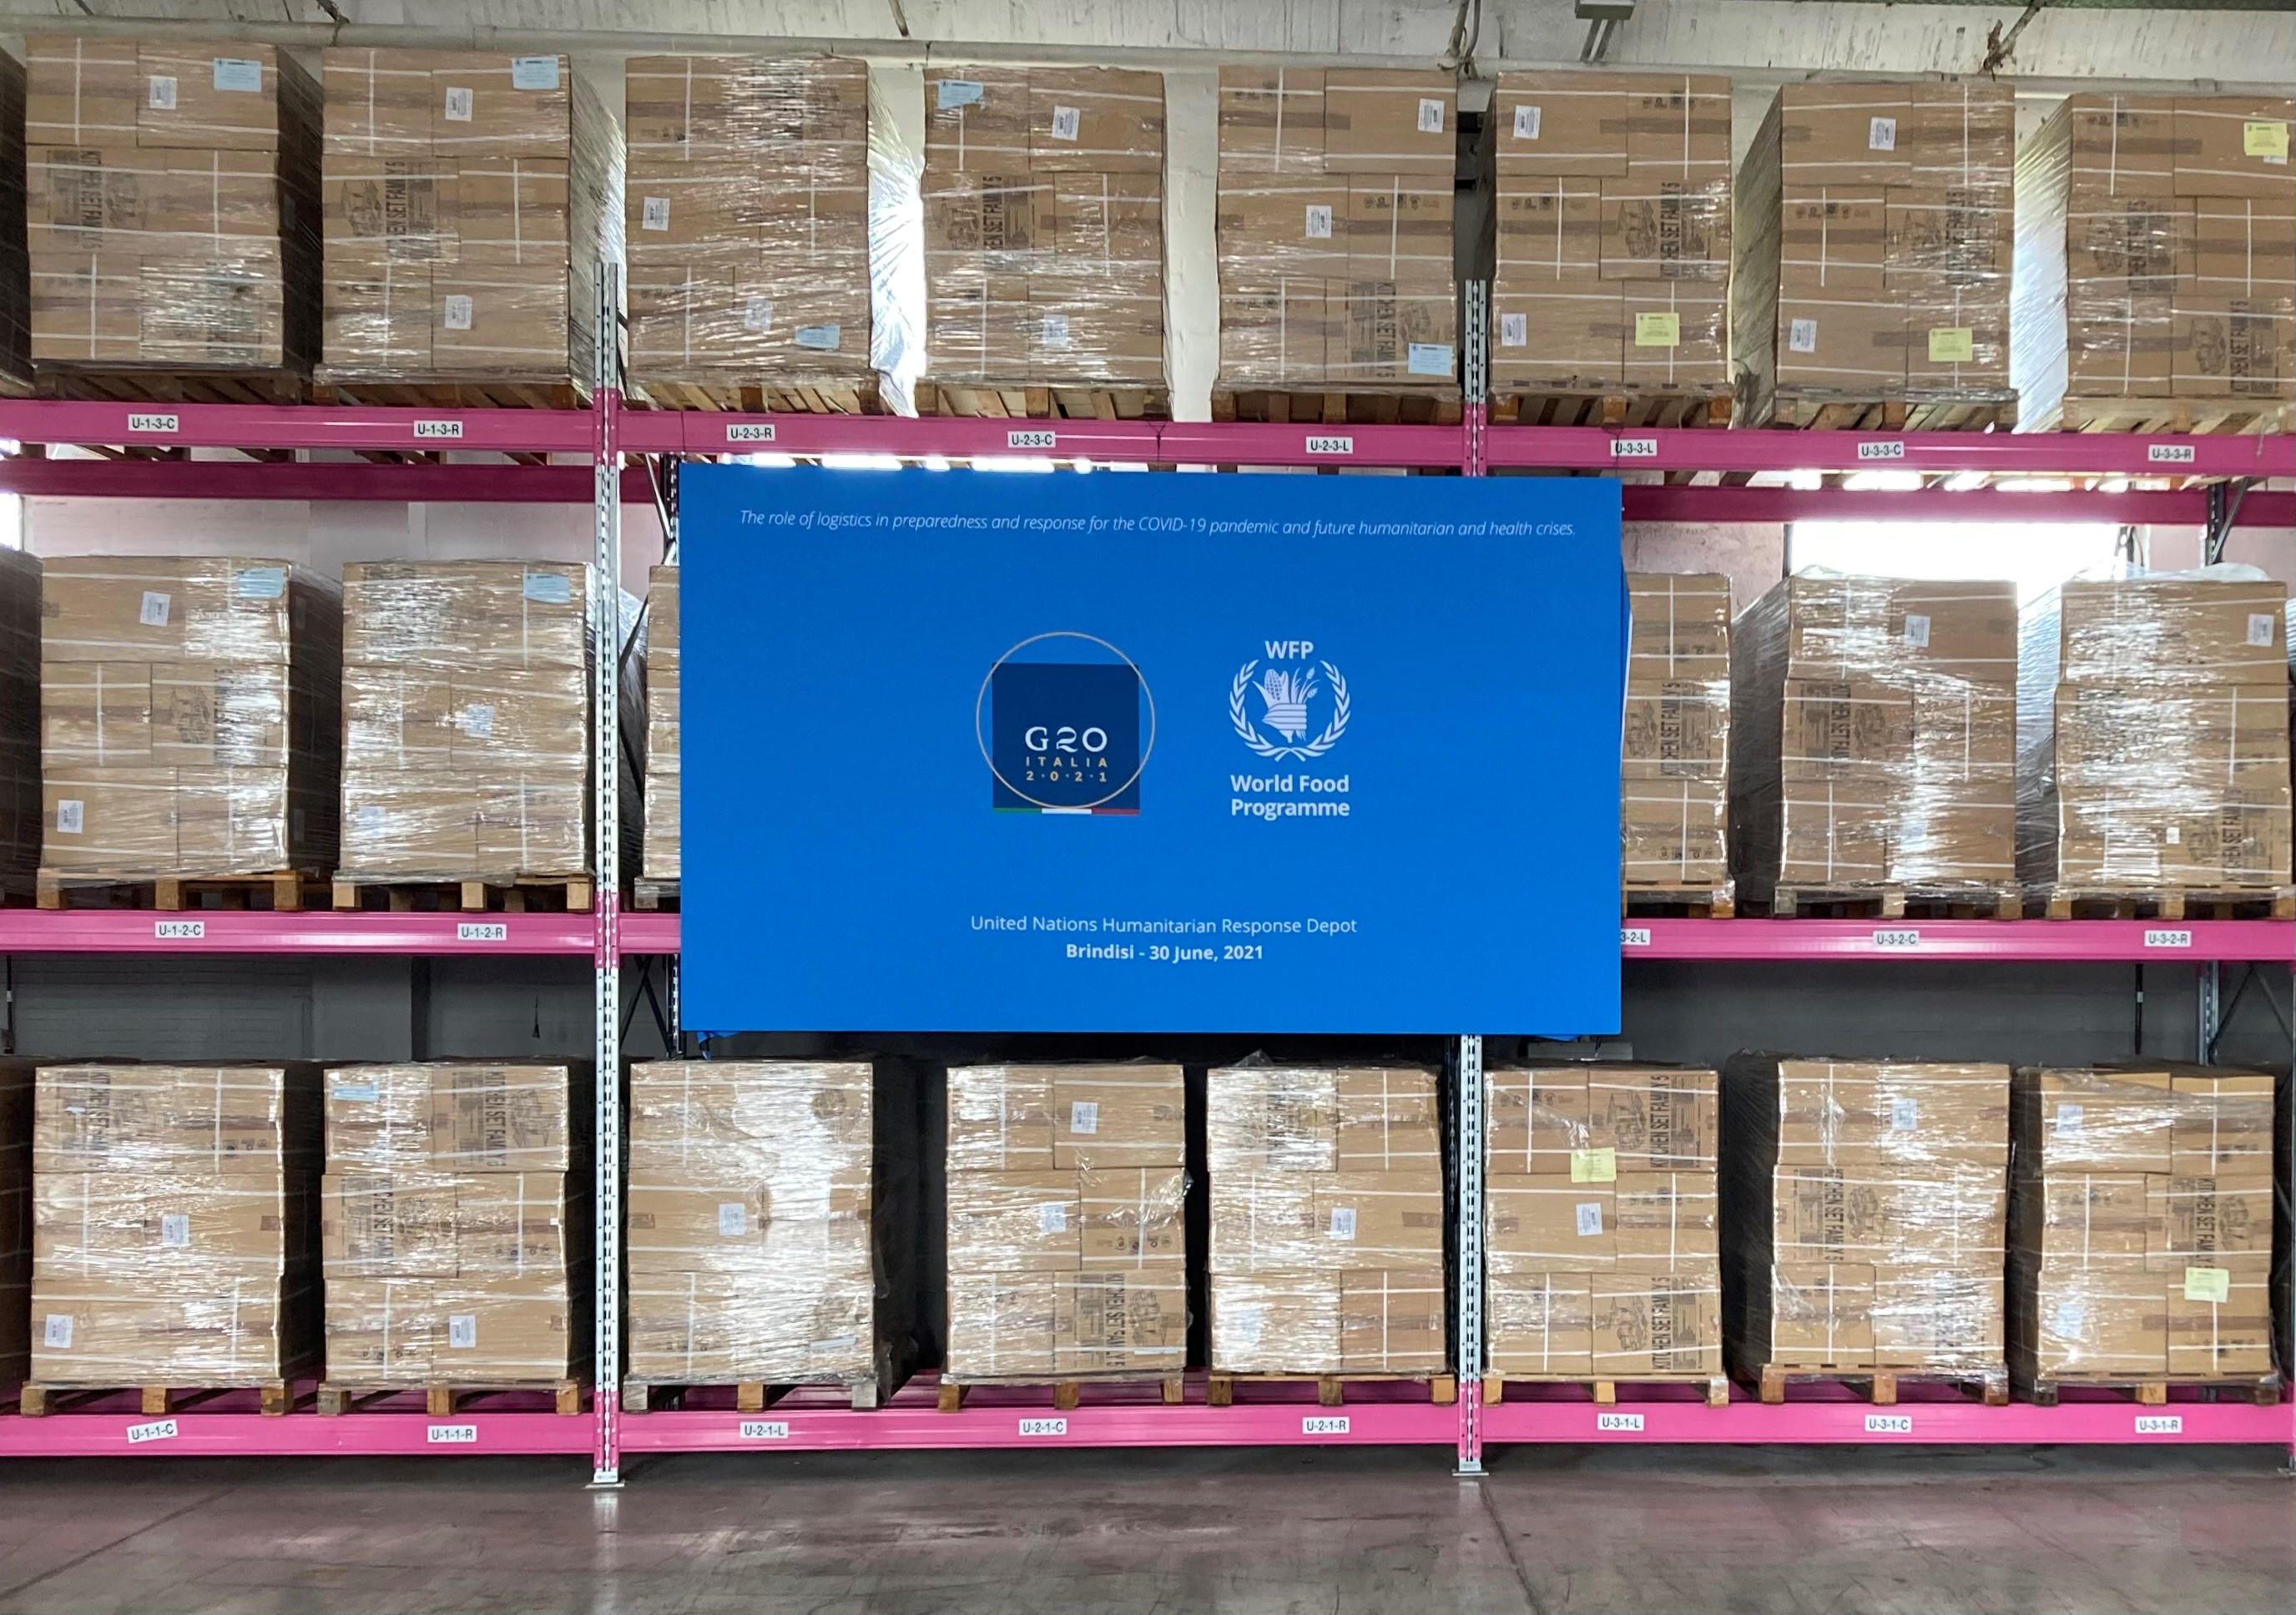 Figure 4: A view of the main warehouse, where a banner for the 2021 G20 Development Ministerial Session was displayed – a reminder of the event that took place in Brindisi just two years ago 